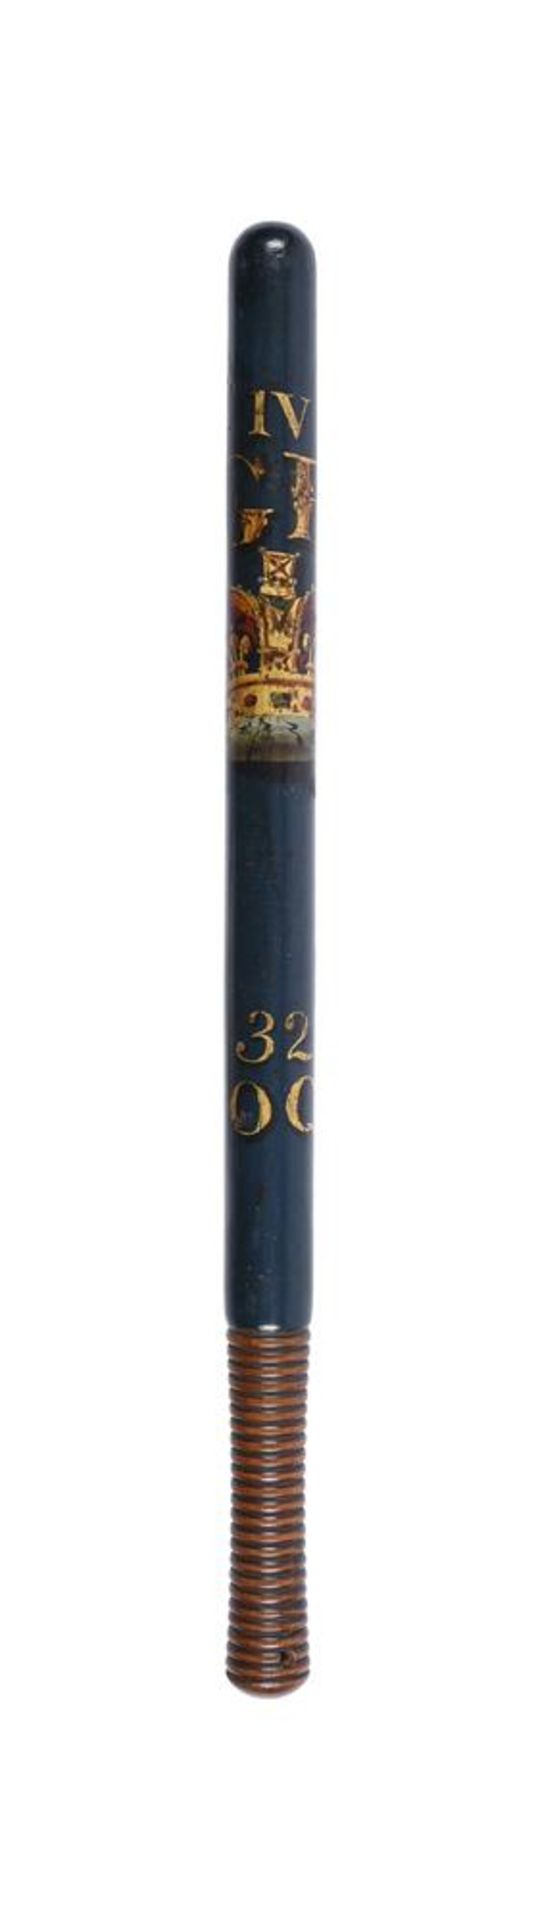 A GEORGE IV PAINTED WOOD TRUNCHEON